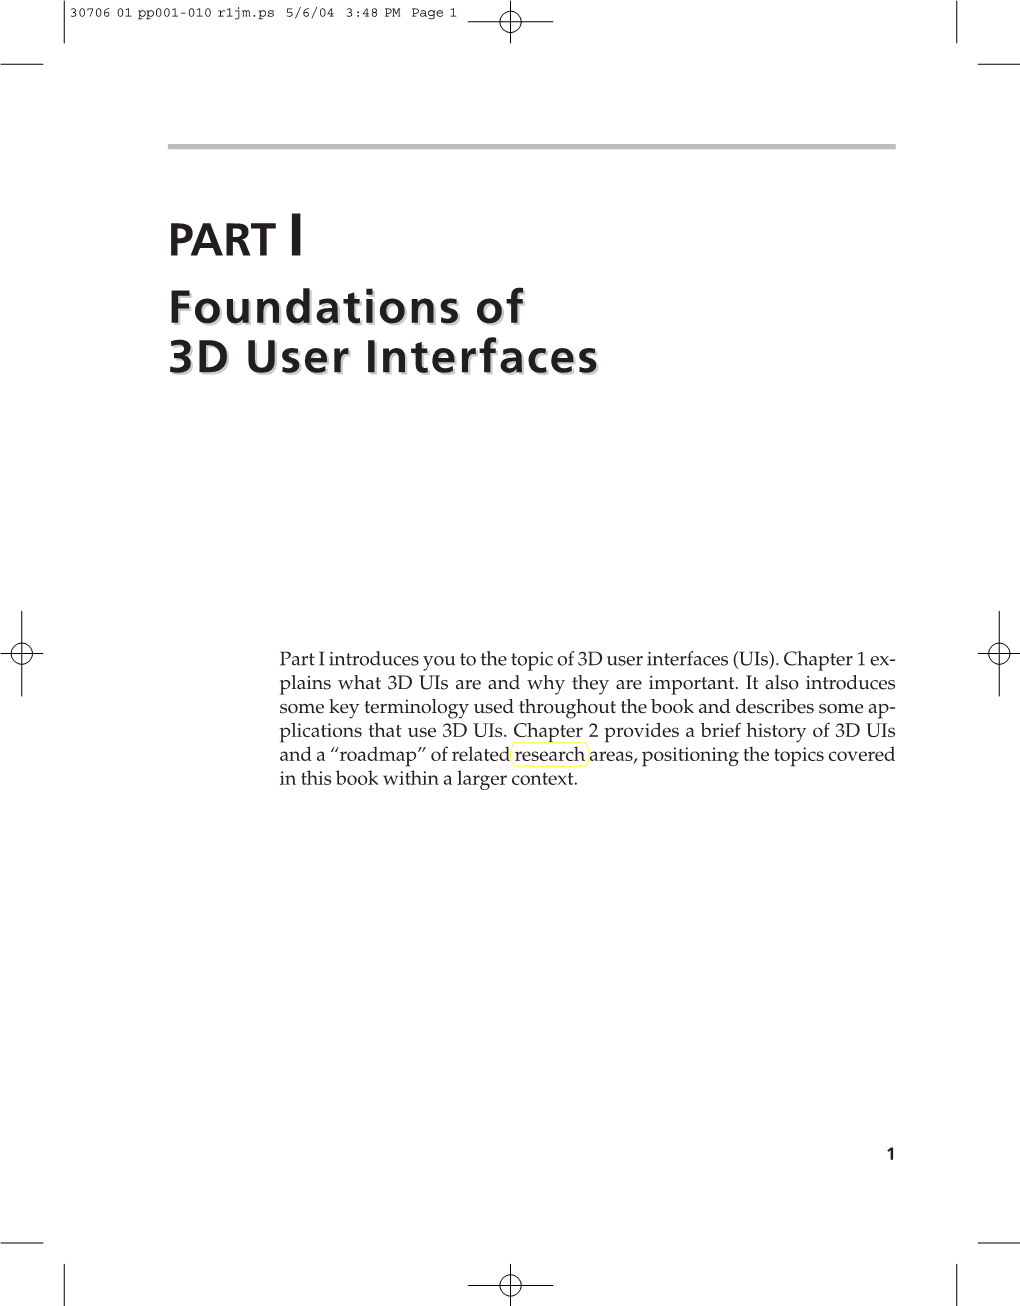 PART I Foundations of 3D User Interfaces